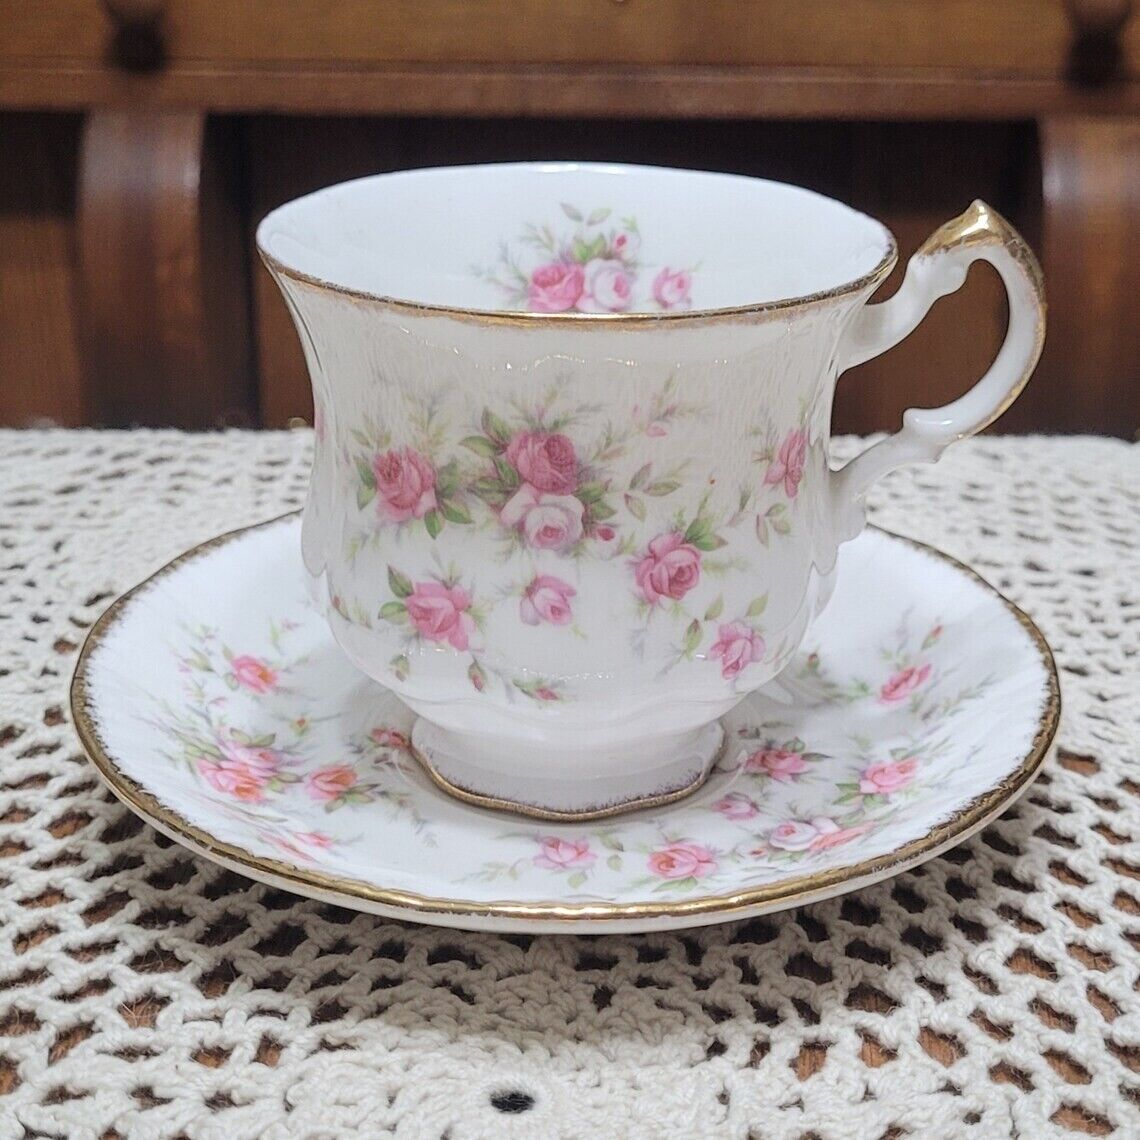 Paragon China Victoriana Rose Footed Teacup and Saucer Set, Gold Trim *See Note